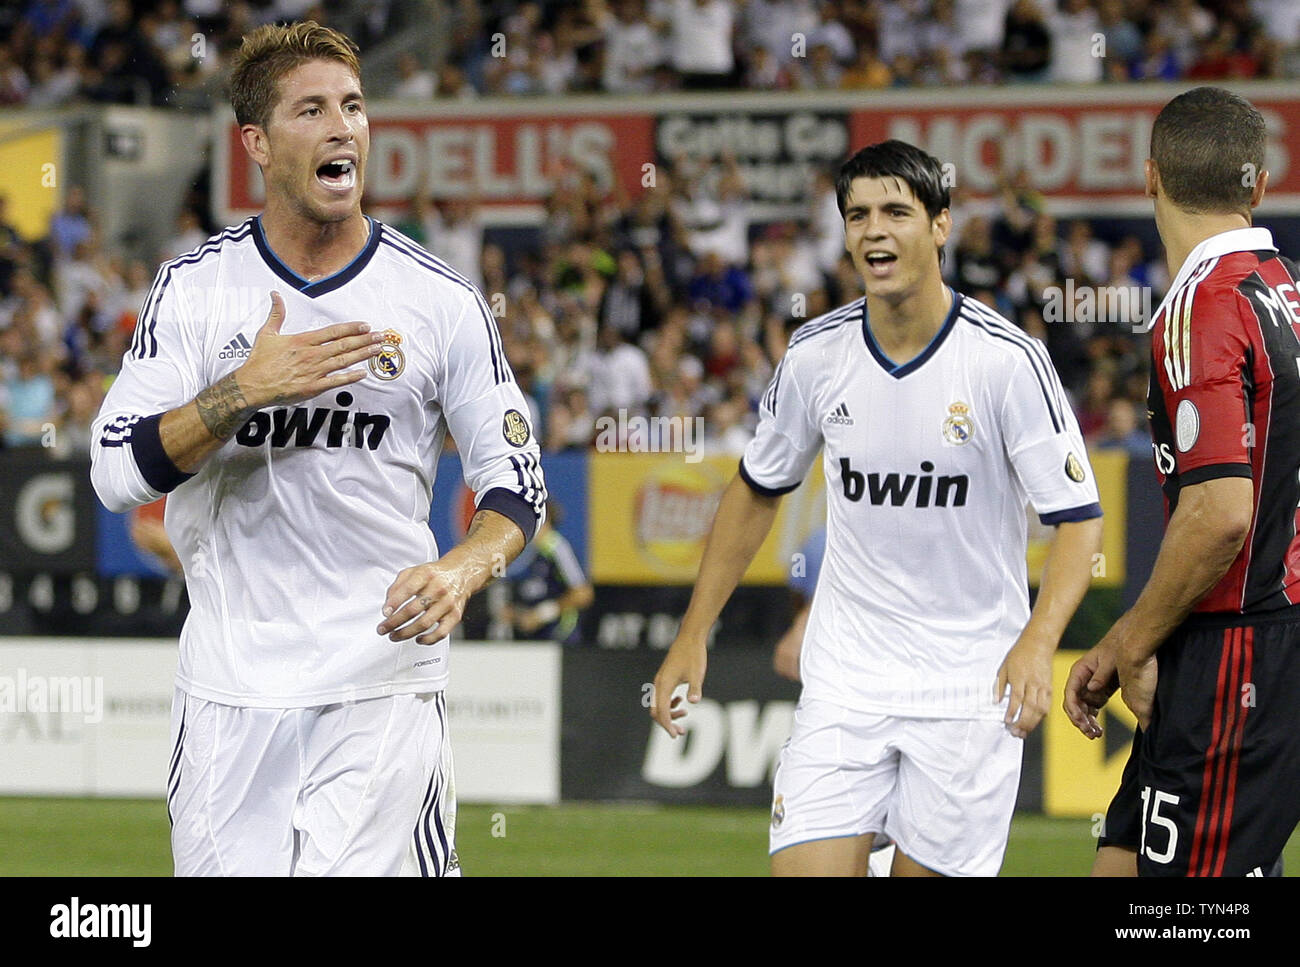 Real Madrid Sergio Ramos reacts after scoring a goal in the second half against  A.C. Milan at the Herbalife World Football Match Challenge 2012 at Yankee Stadium in New York City on August 8, 2012.  Real Madrid defeated A.C. Milan 5-1.     UPI/John Angelillo Stock Photo